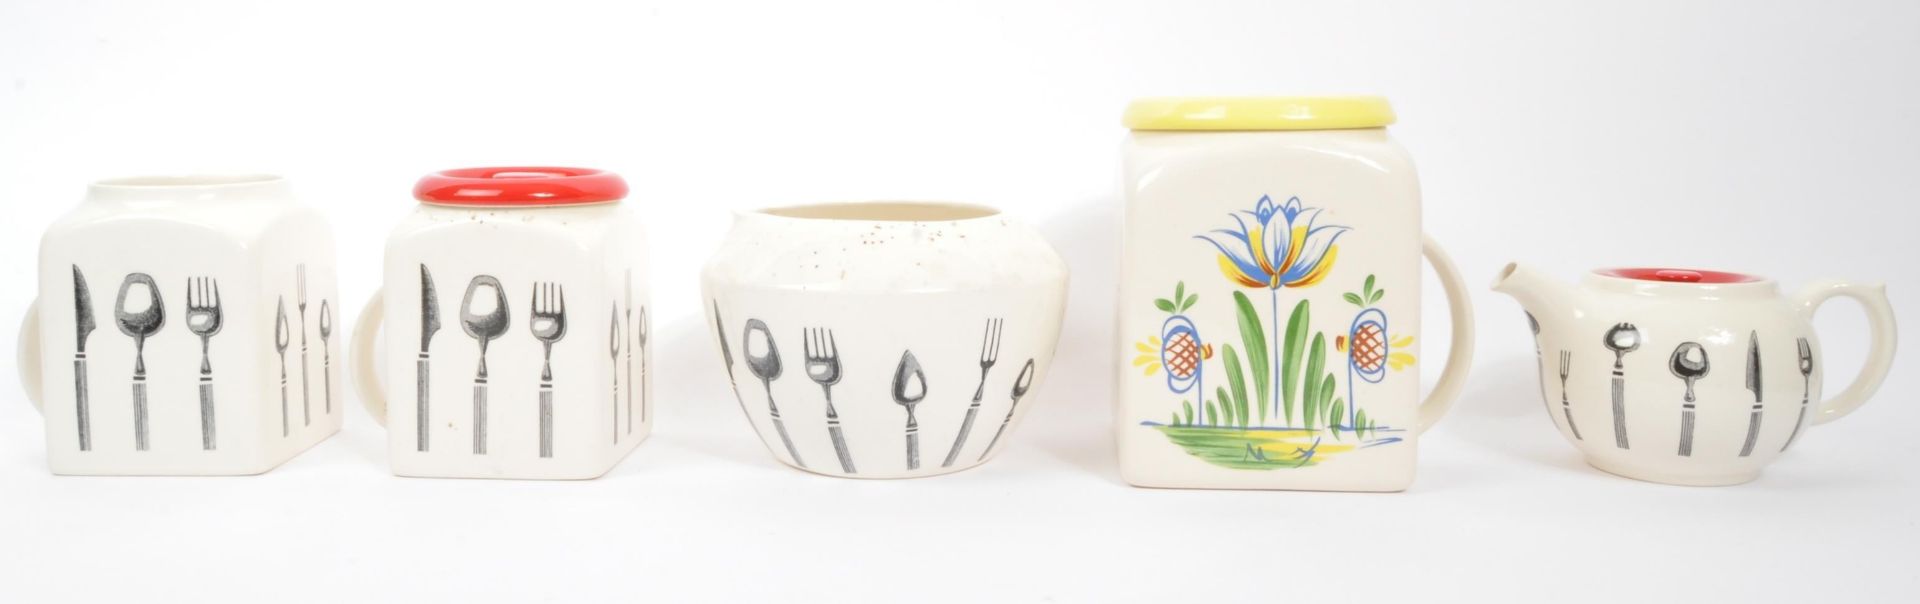 COLLECTION OF BRISTOL PONTNEY 'LONG LINE' POTTERY KITCHEN WARE - Image 2 of 6